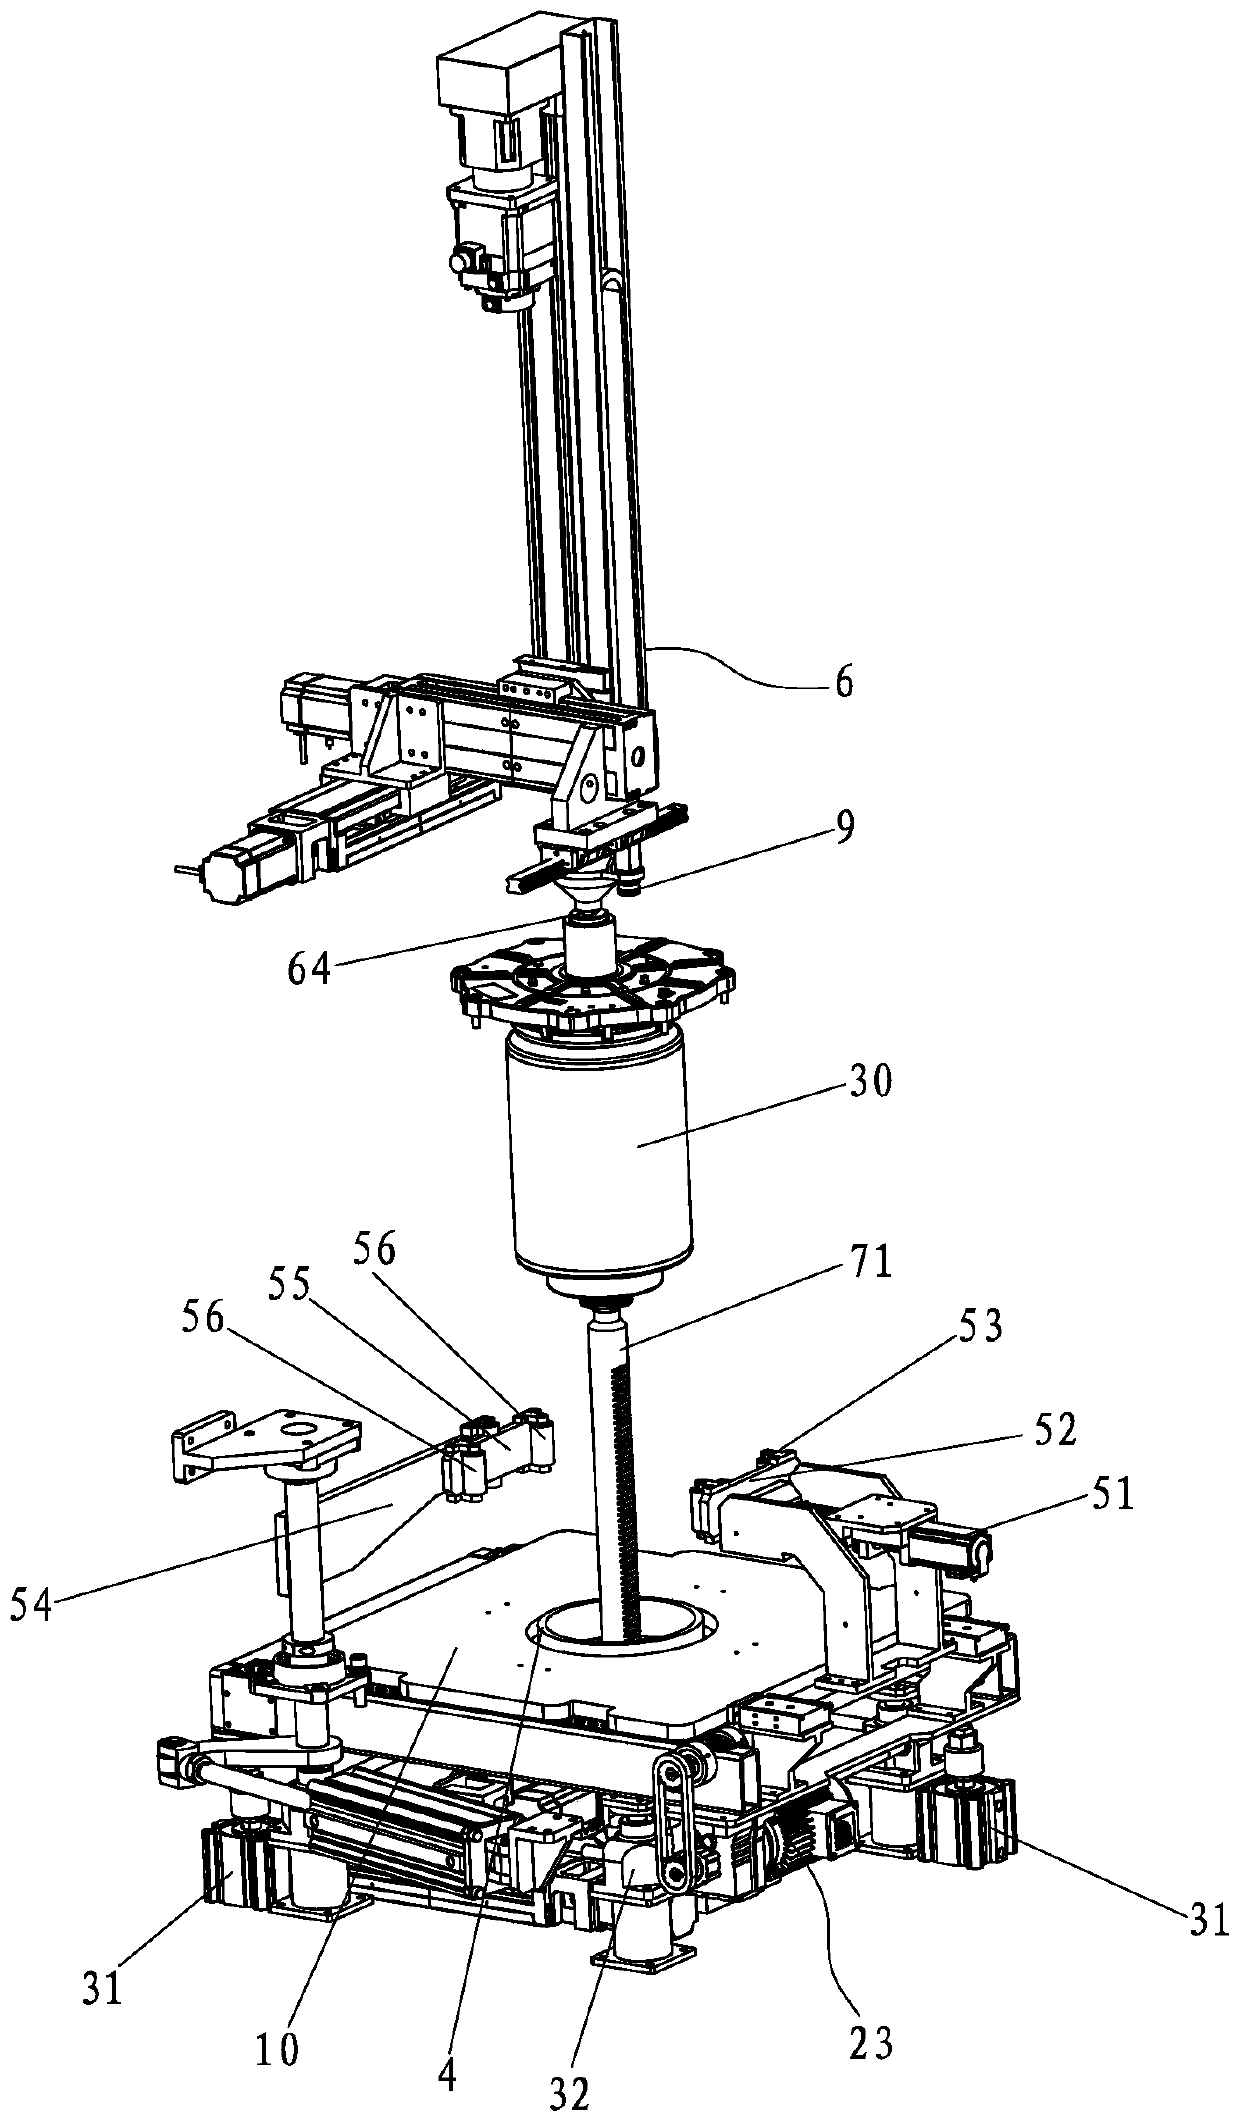 A motor rotor and stator automatic centering mechanism